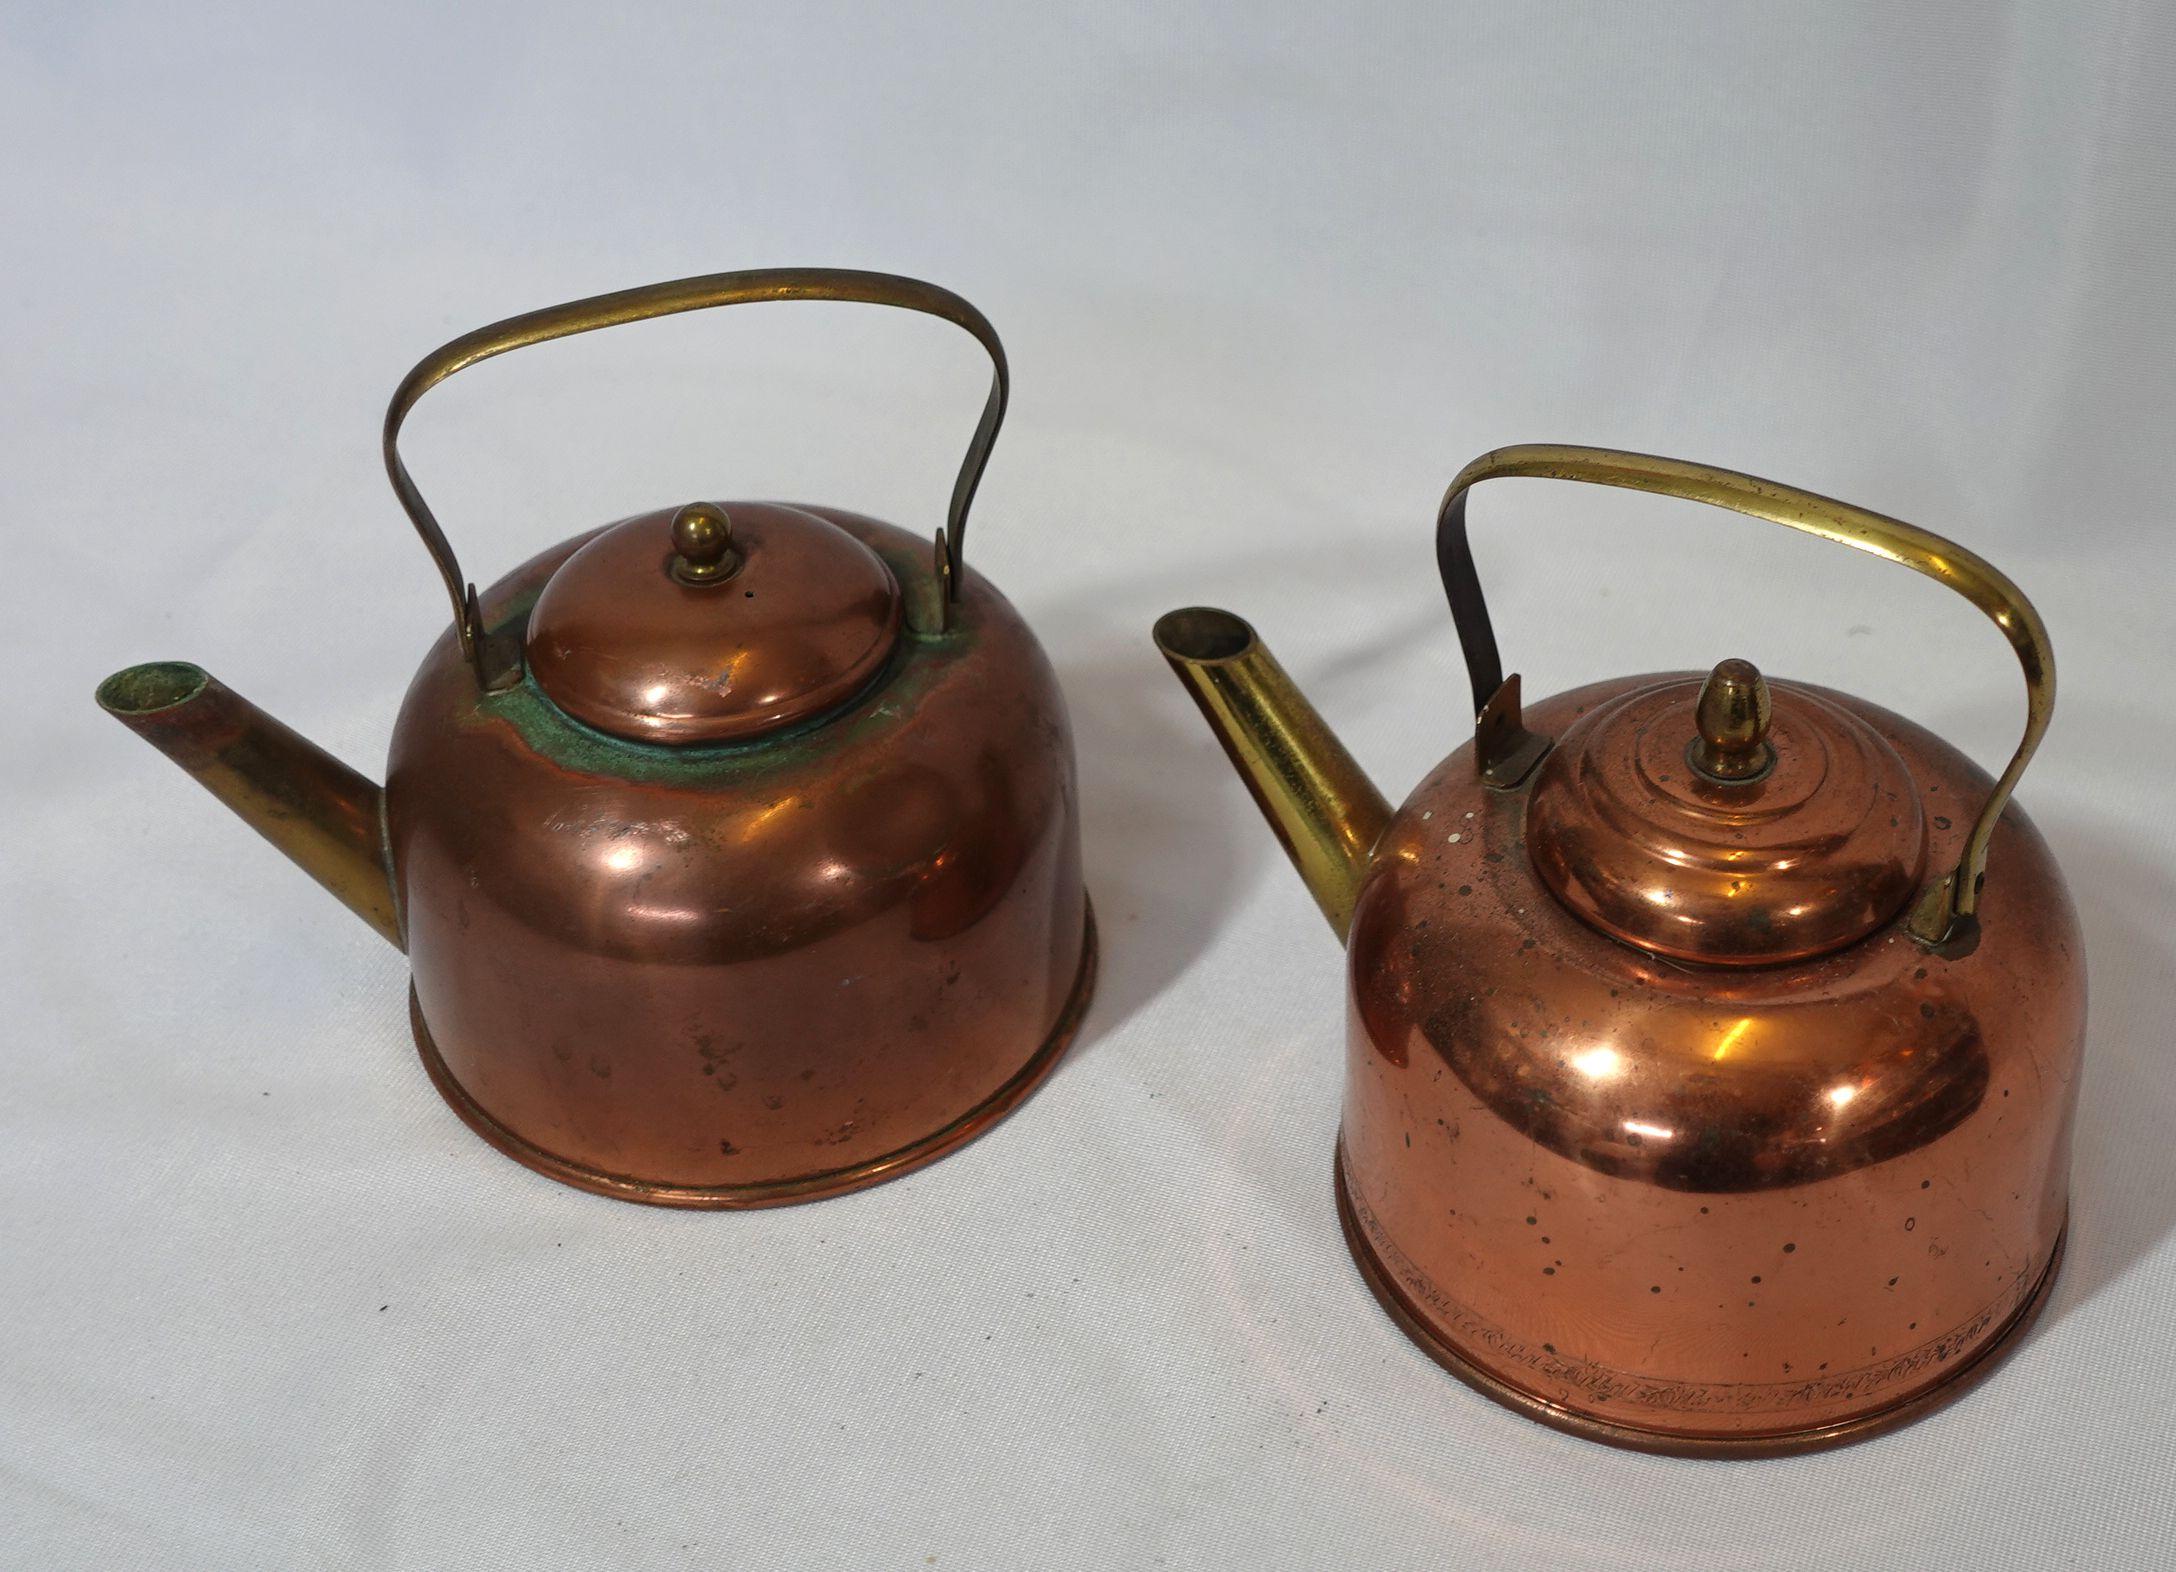 Pair of American Copper Tea Kettle, Taunton Massachuttes, TC#09-1 & 2, from the mid-20th century, very well hand-made with delicate craftsmanship, and highly collectible antique.
